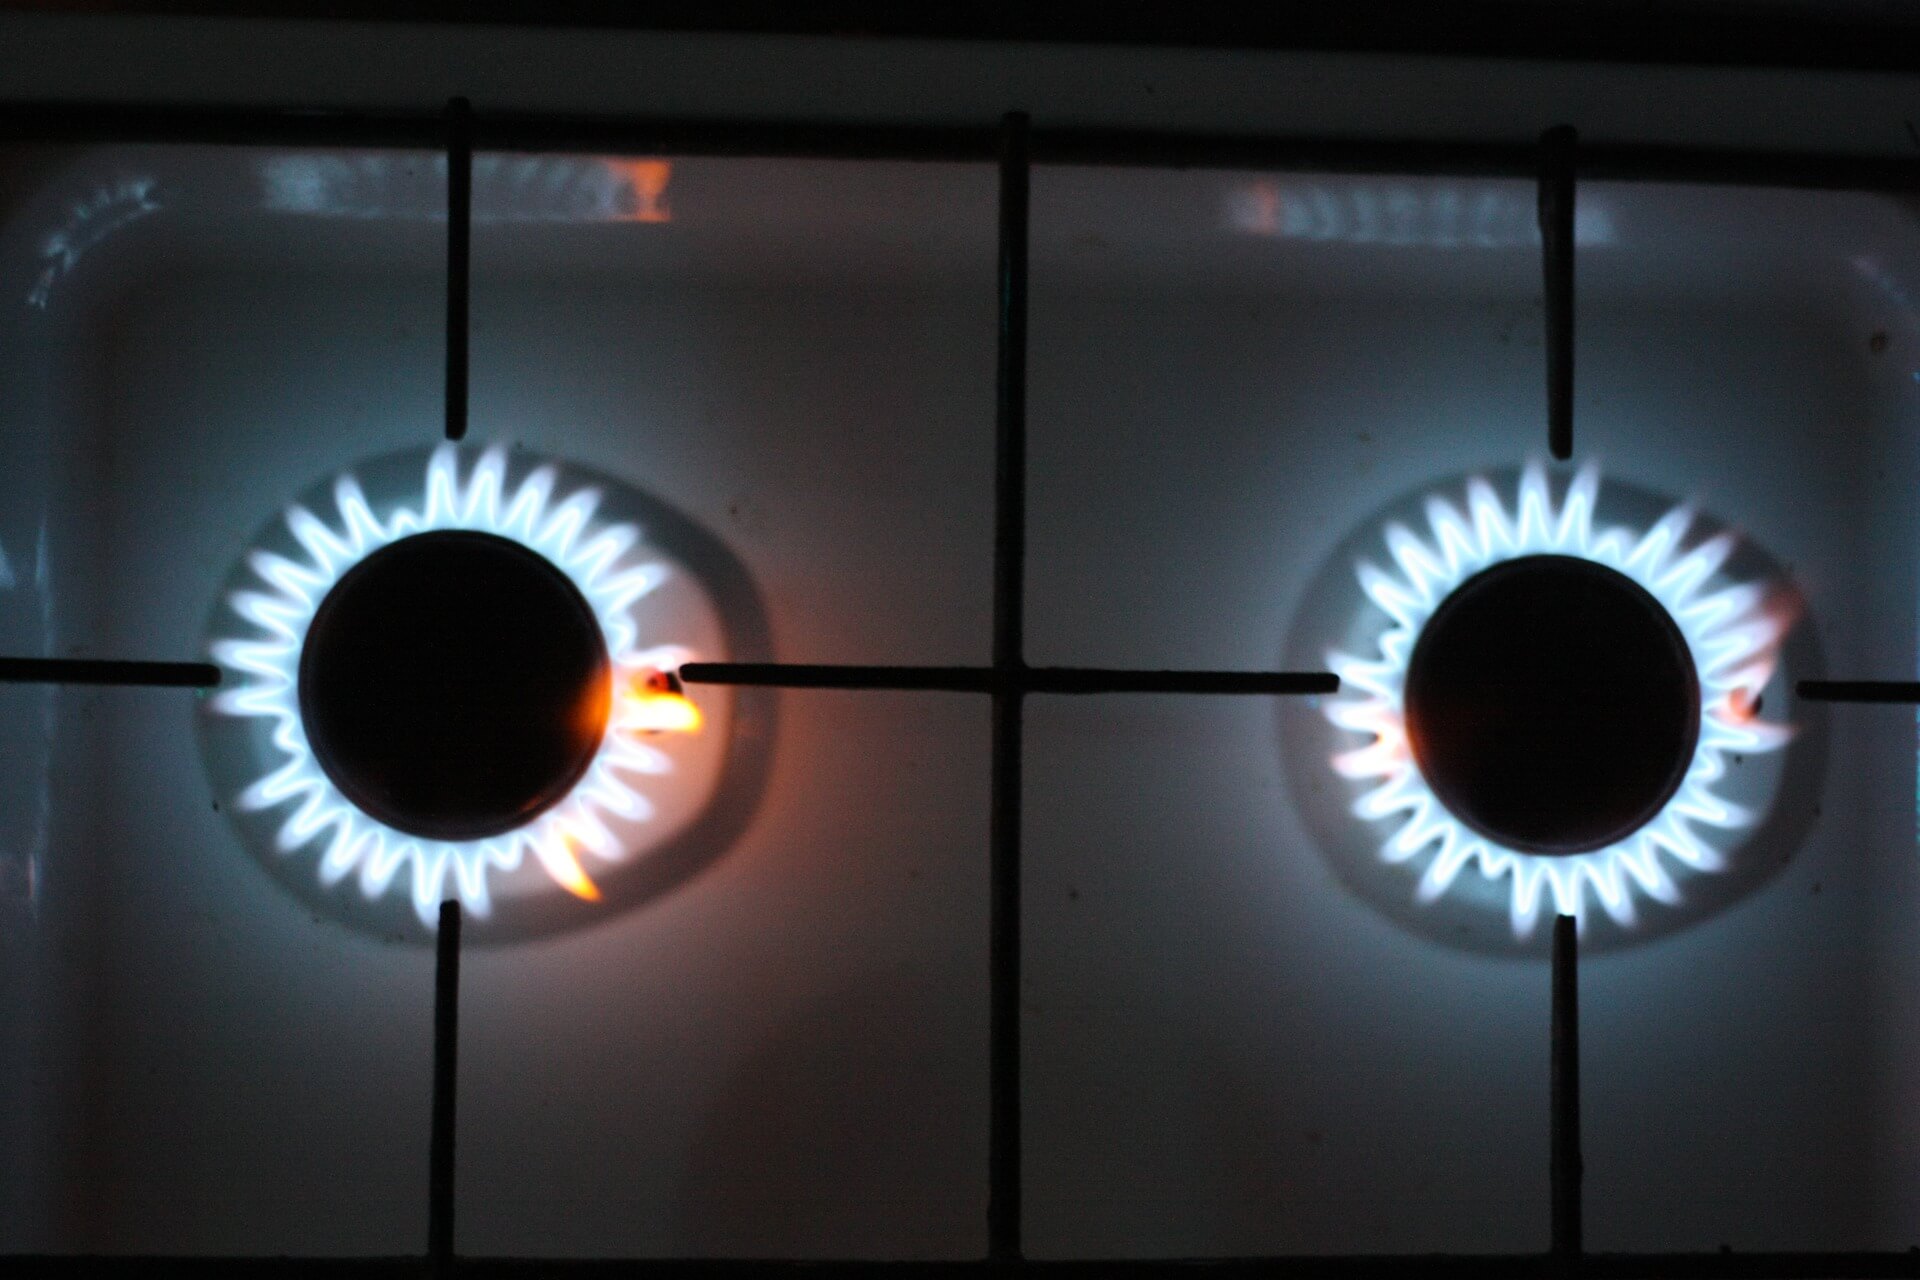 A gas stove with two burners on.